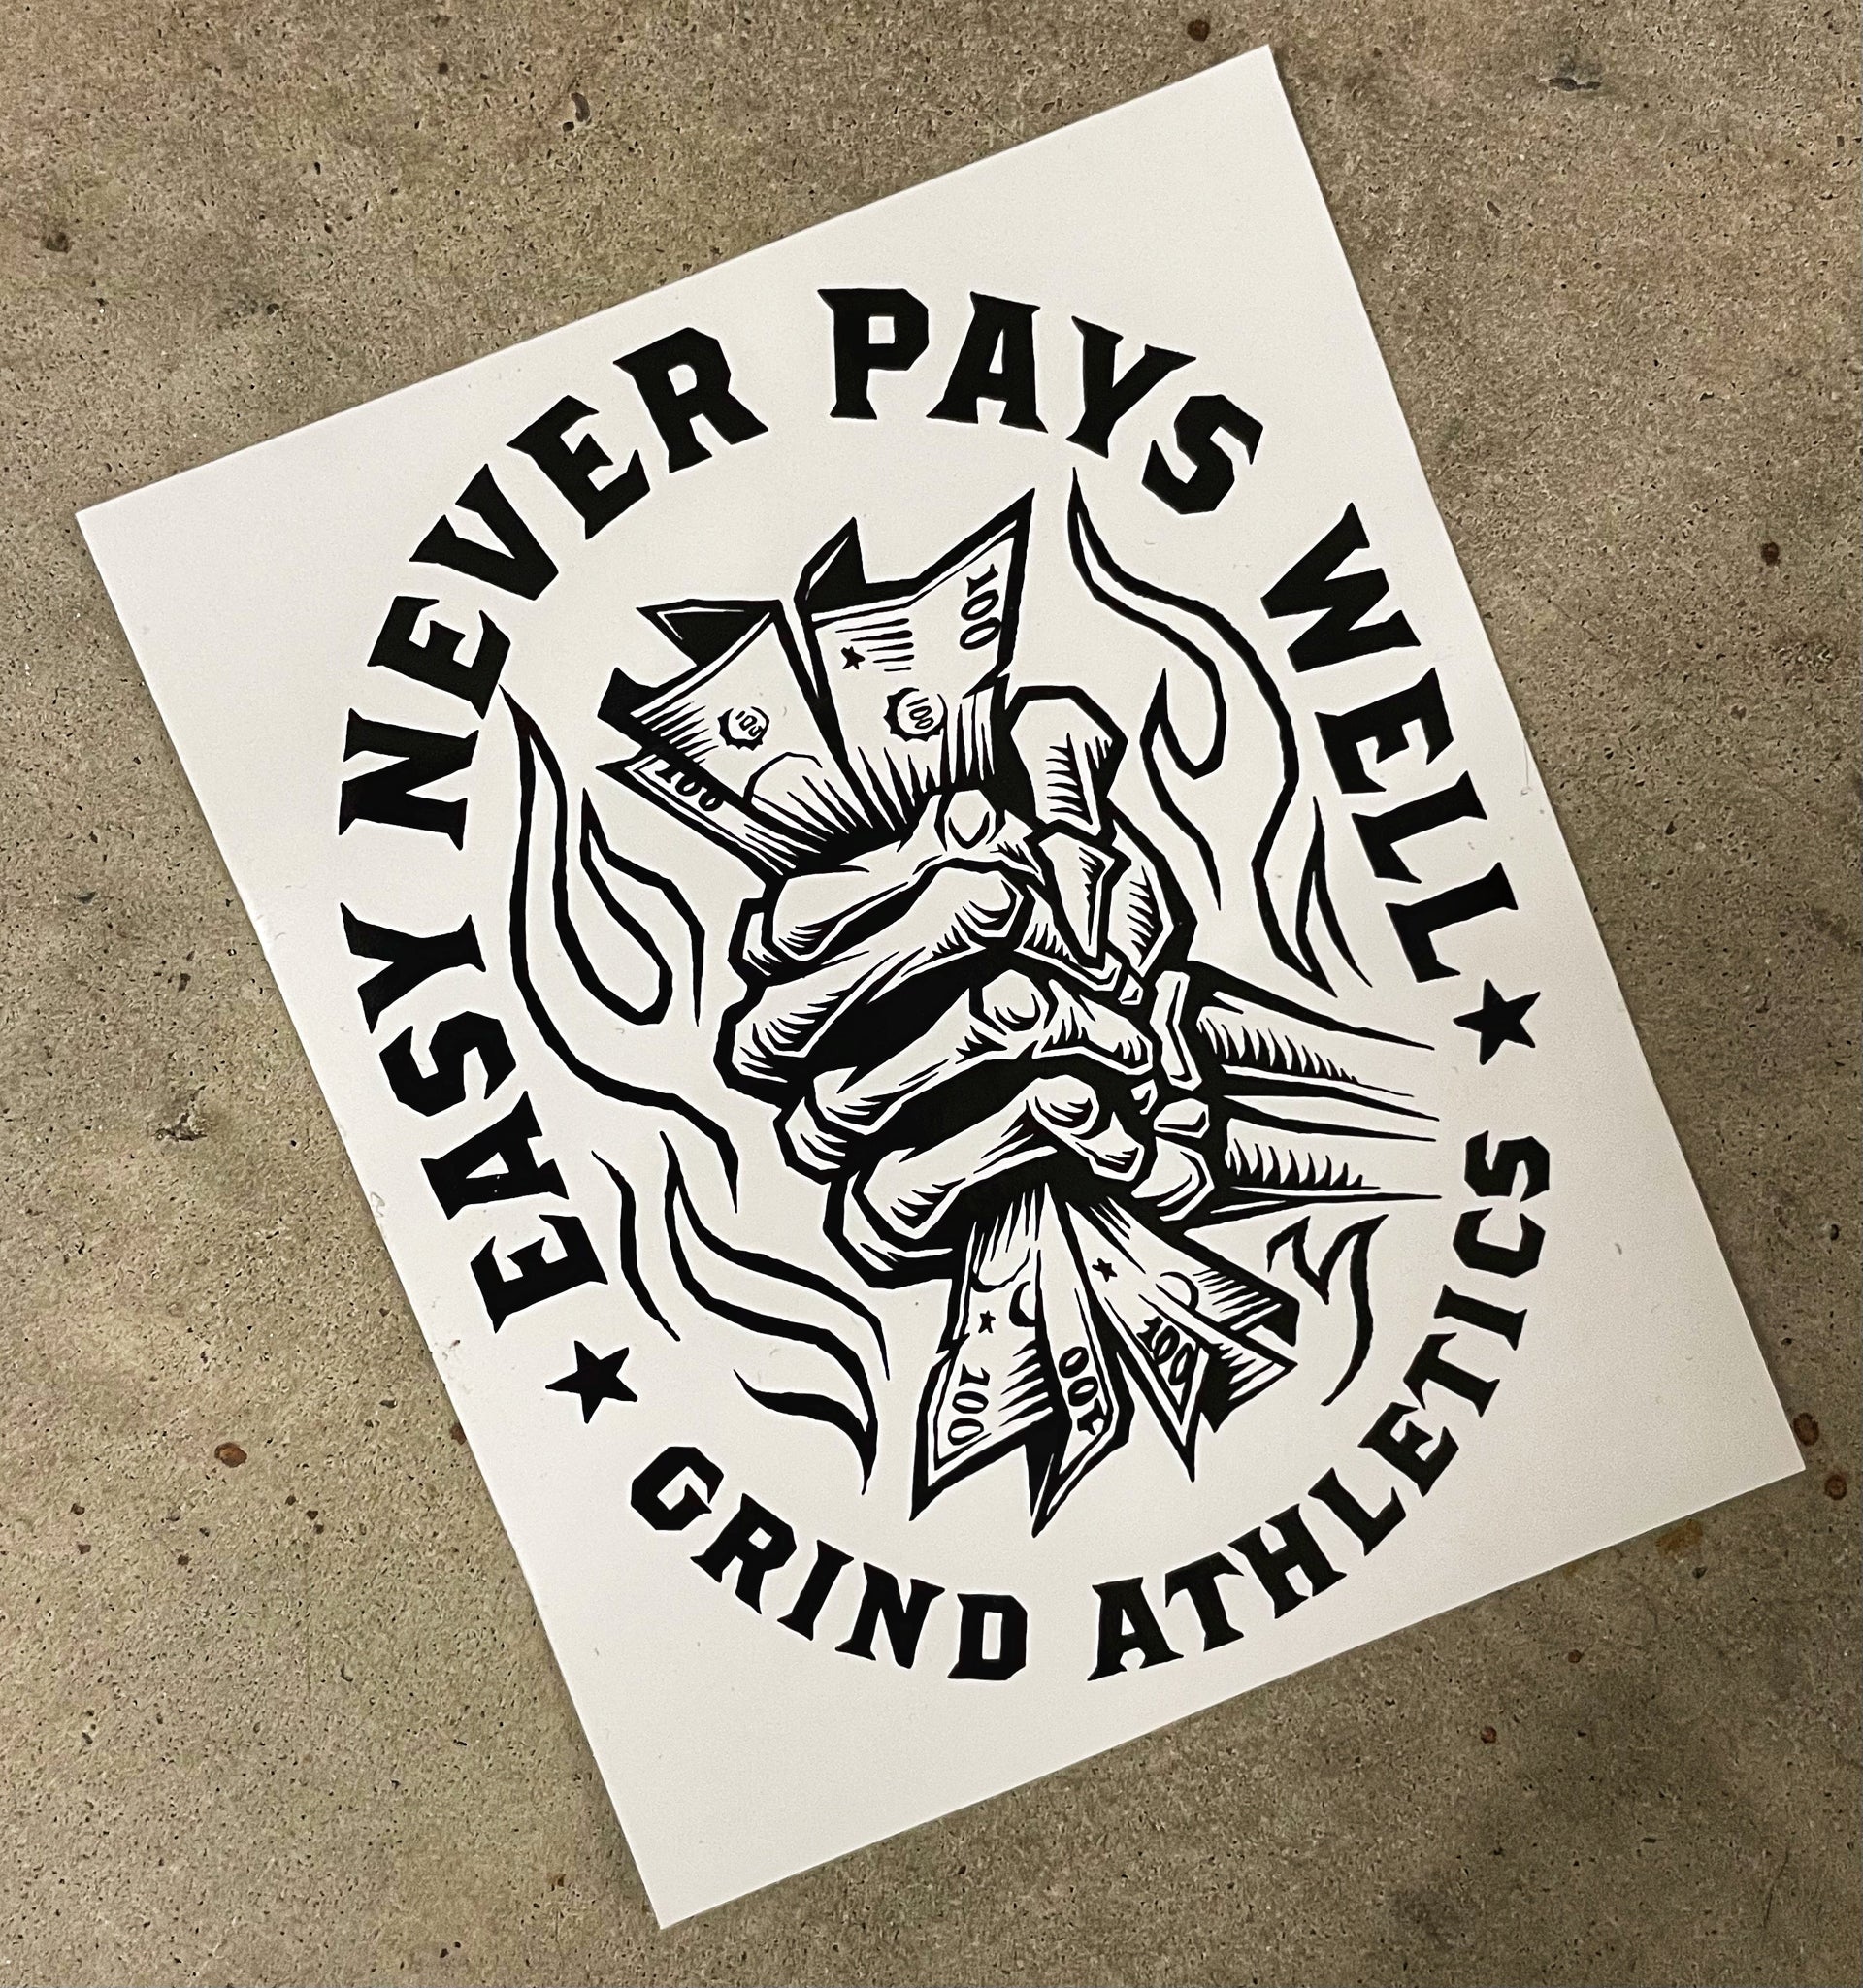 The Grind Athletics Easy Never Pays Well - Sticker